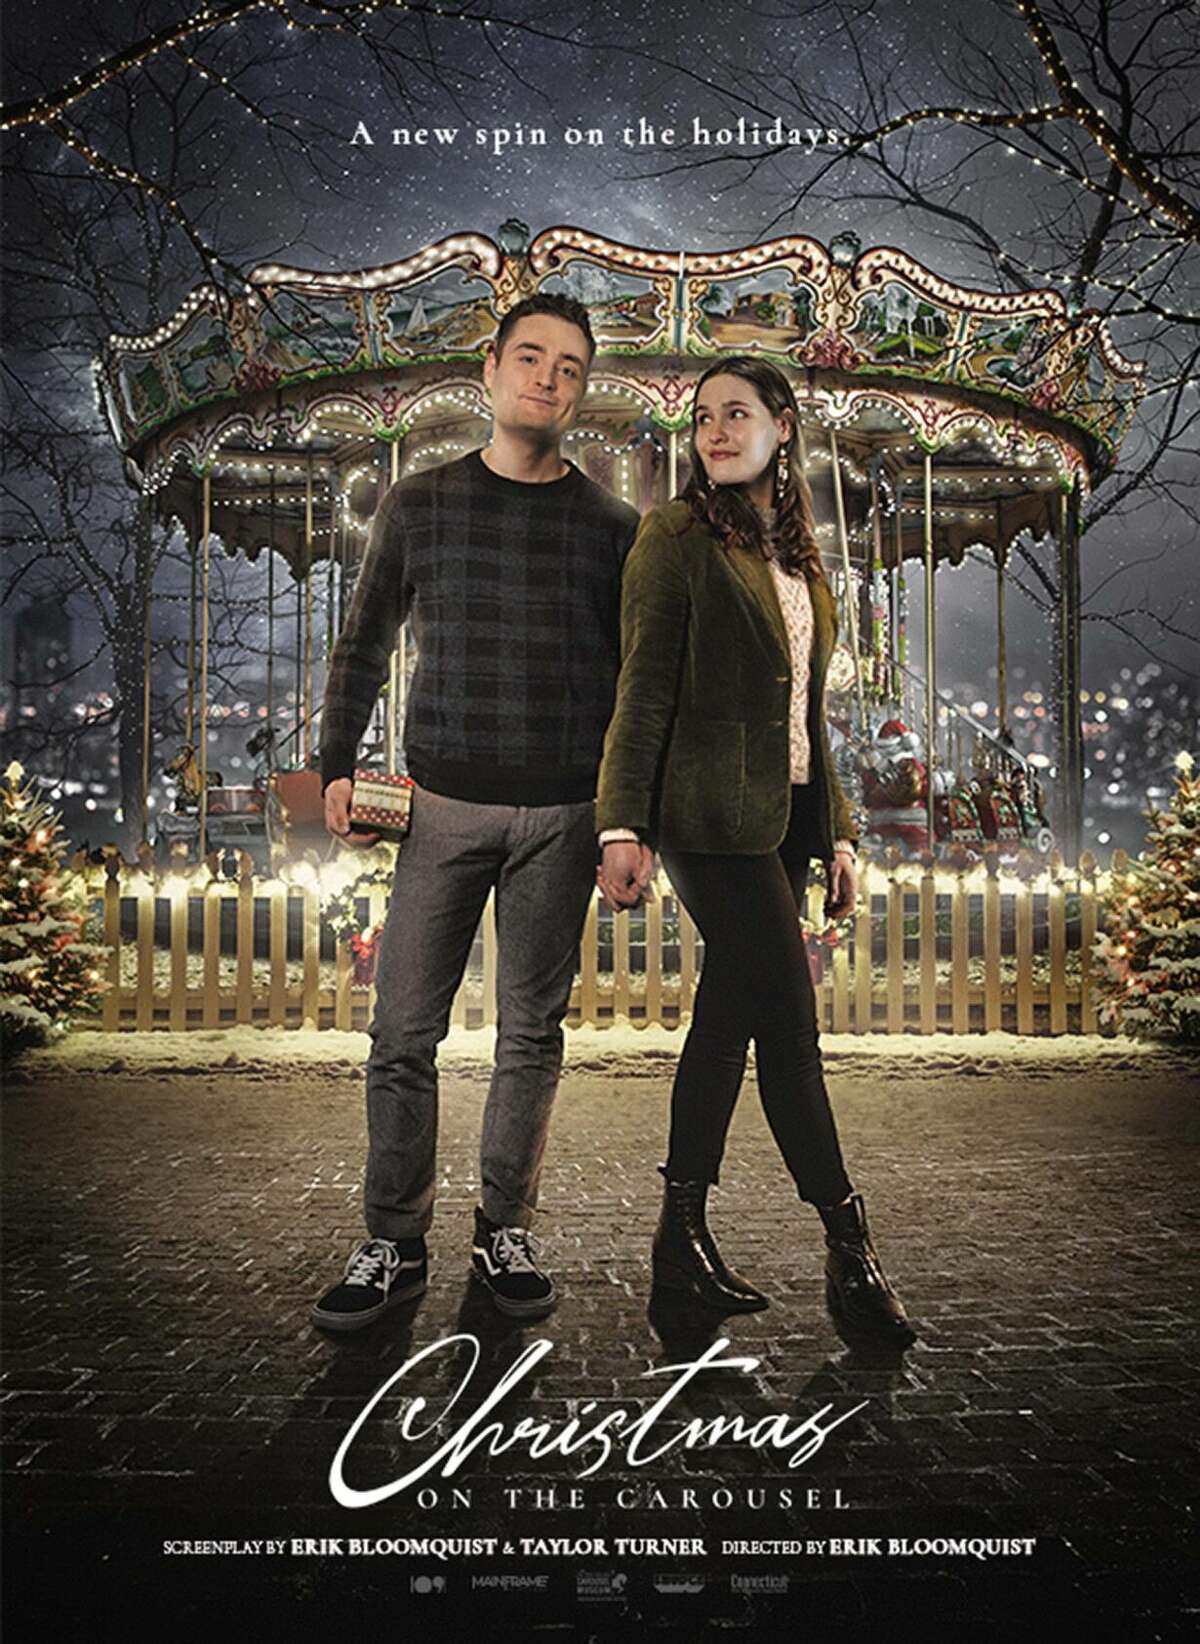 The brothers’ filmmaking spans genres, including the feel-good romance of Christmas on the Carousel.